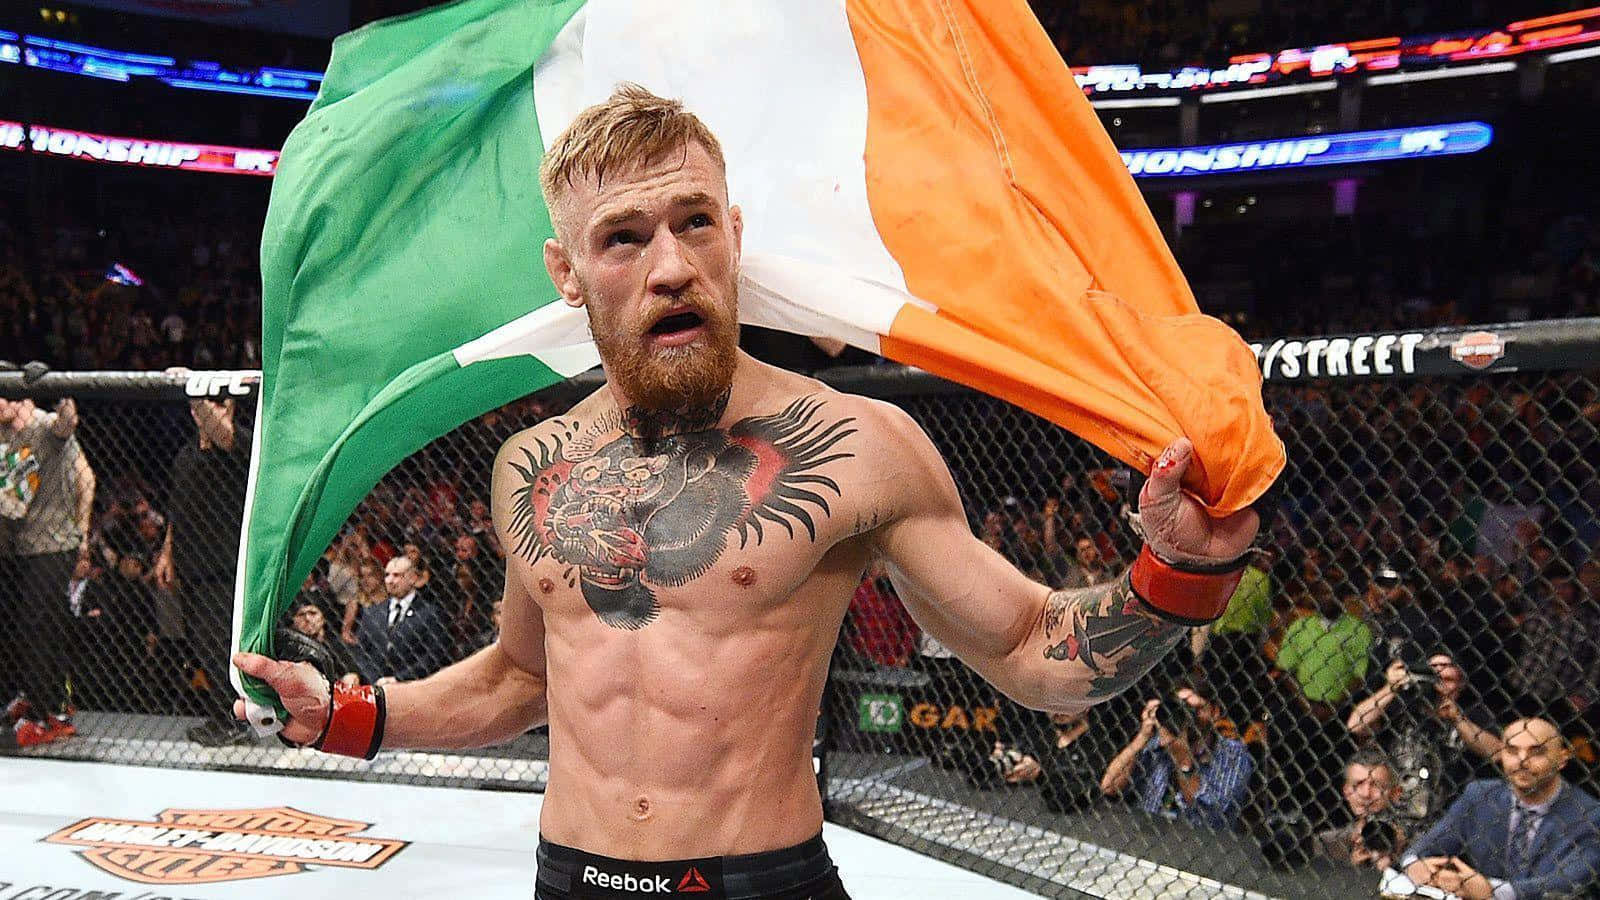 Download A Man With Tattoos Holding An Irish Flag | Wallpapers.com